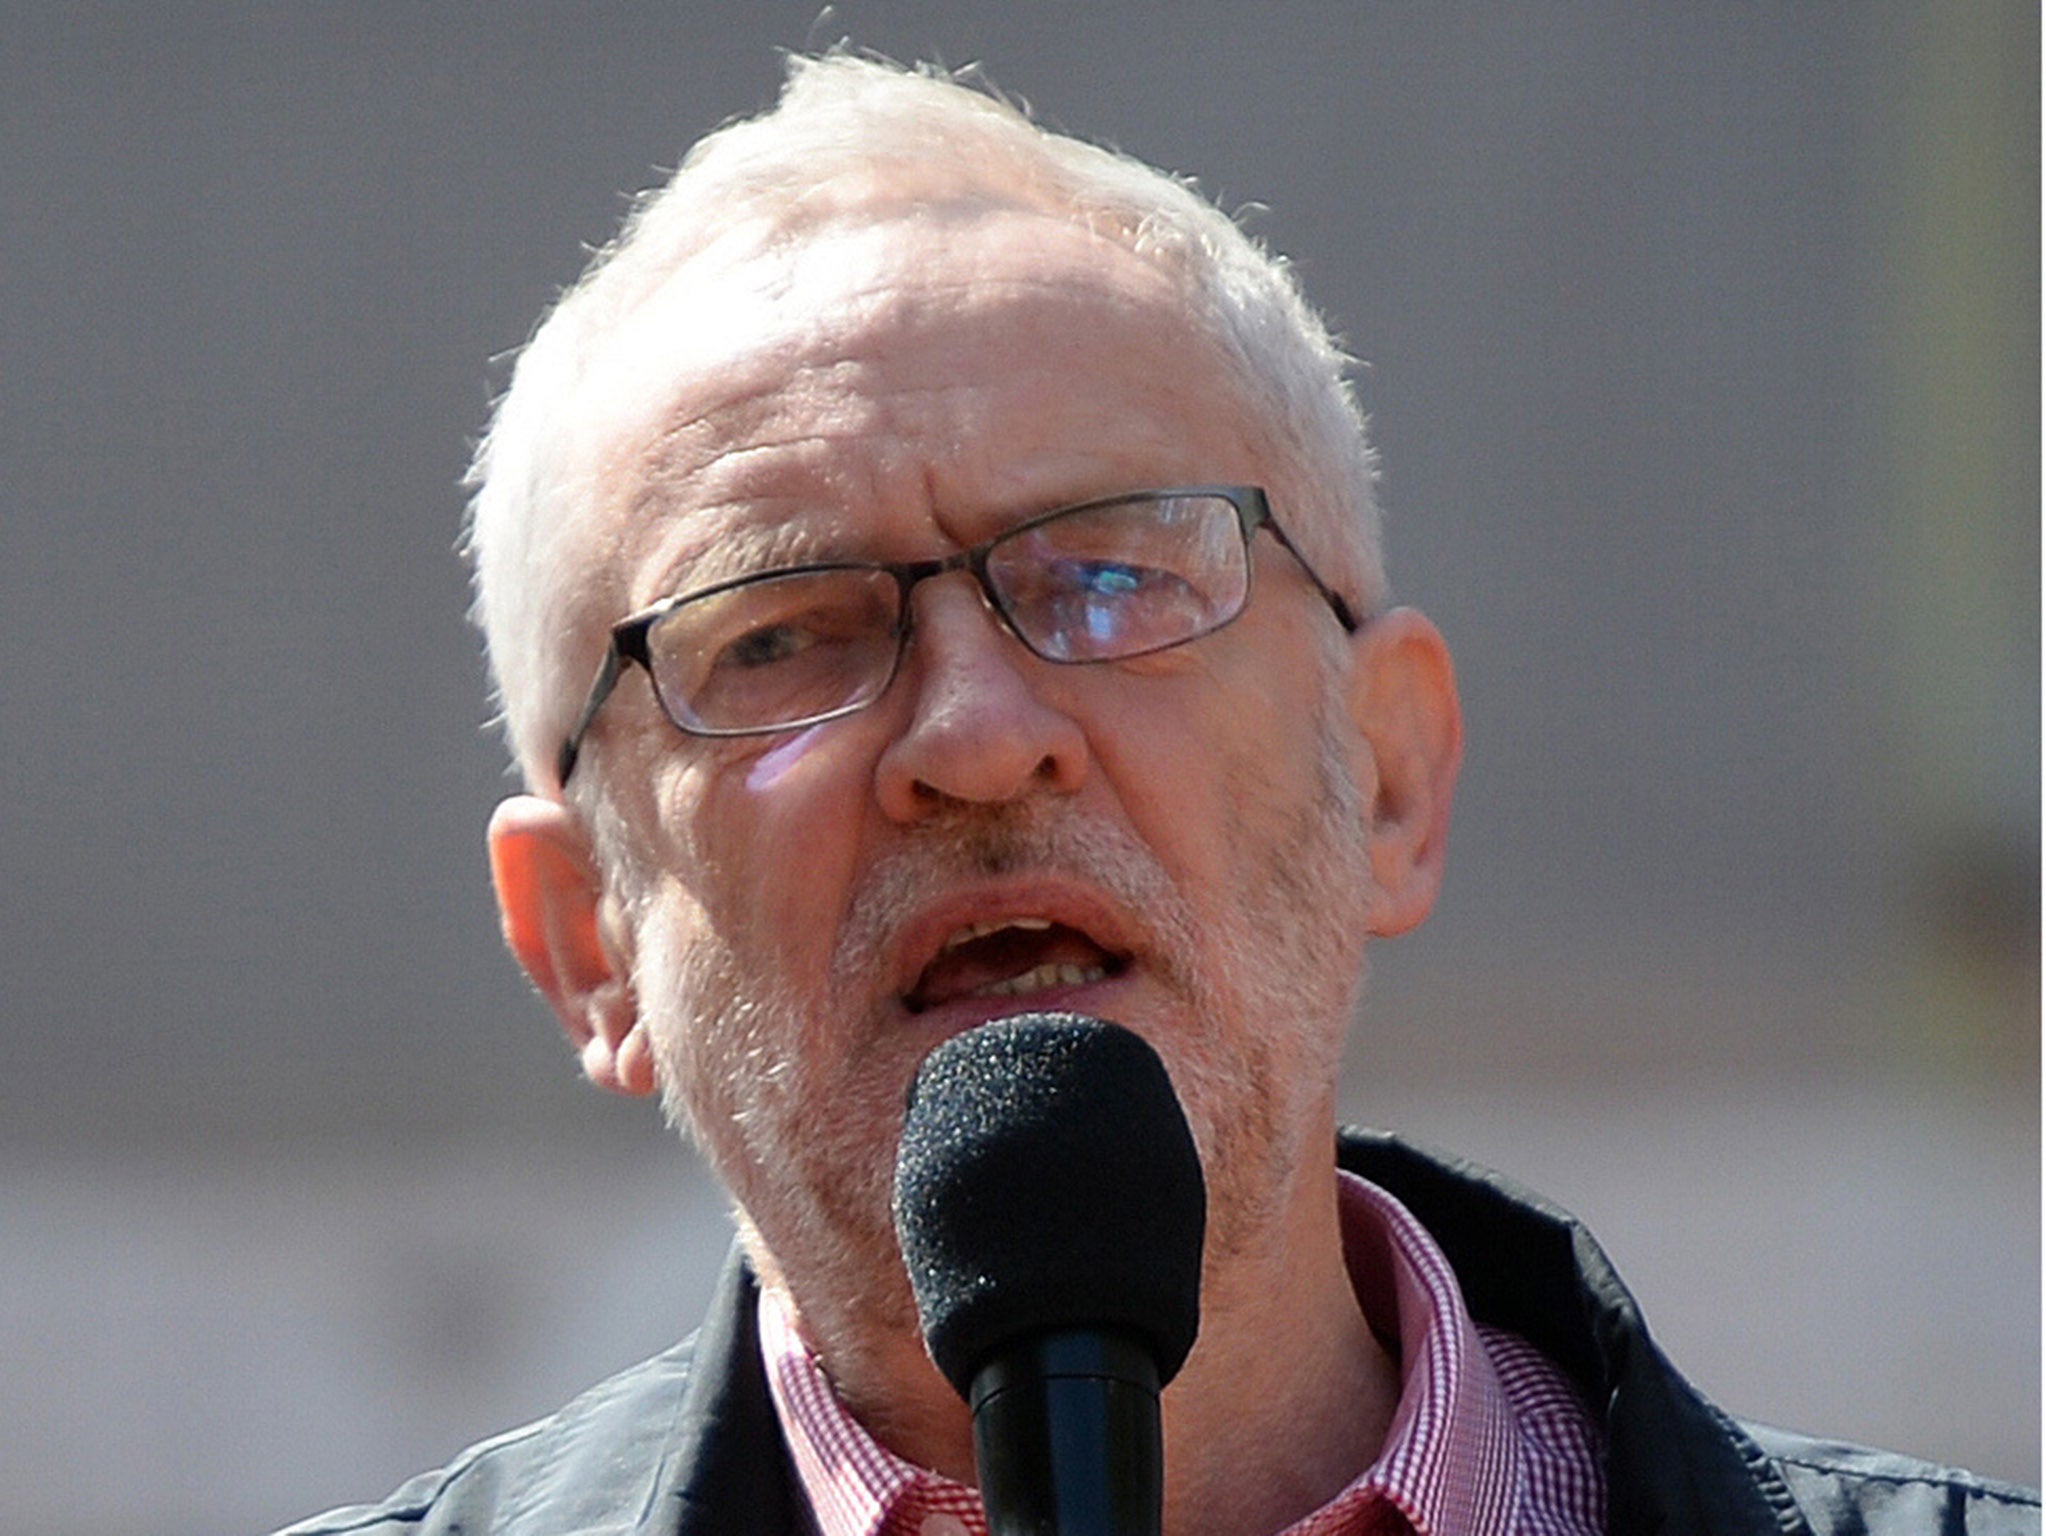 Jeremy Corbyn insisted the party is "united" in opposing anti-Semitism